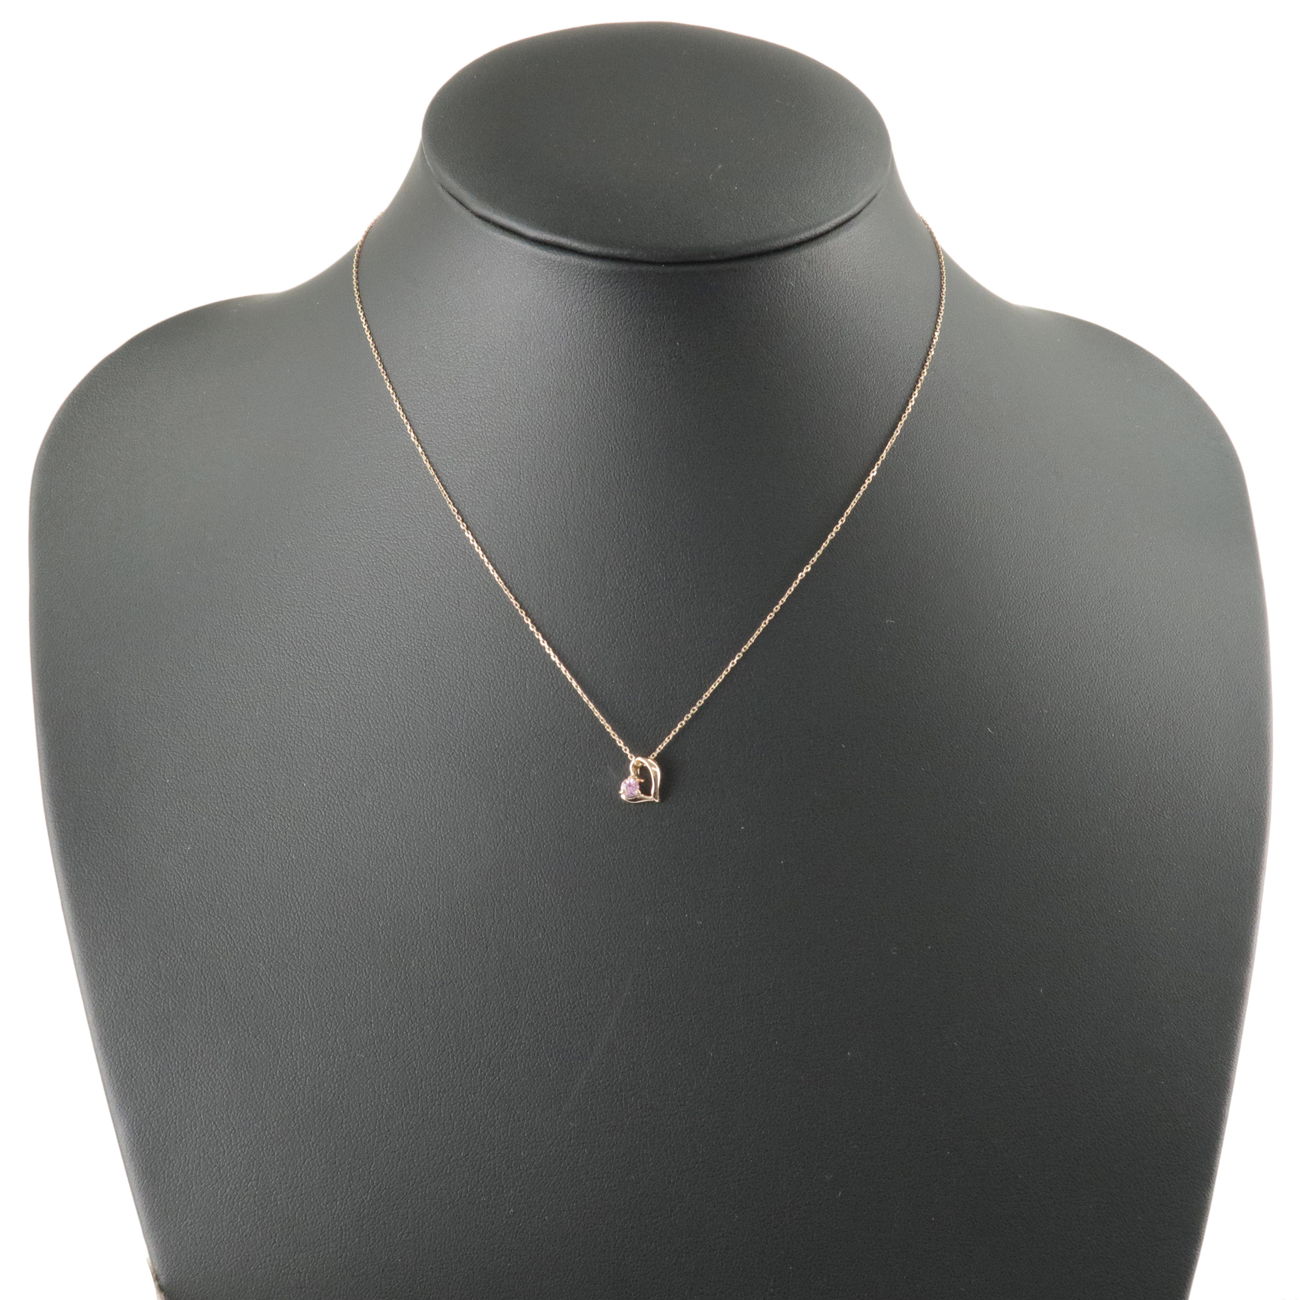 4C Heart 1P Pink Sapphire Necklace K18PG 750PG Rose Gold